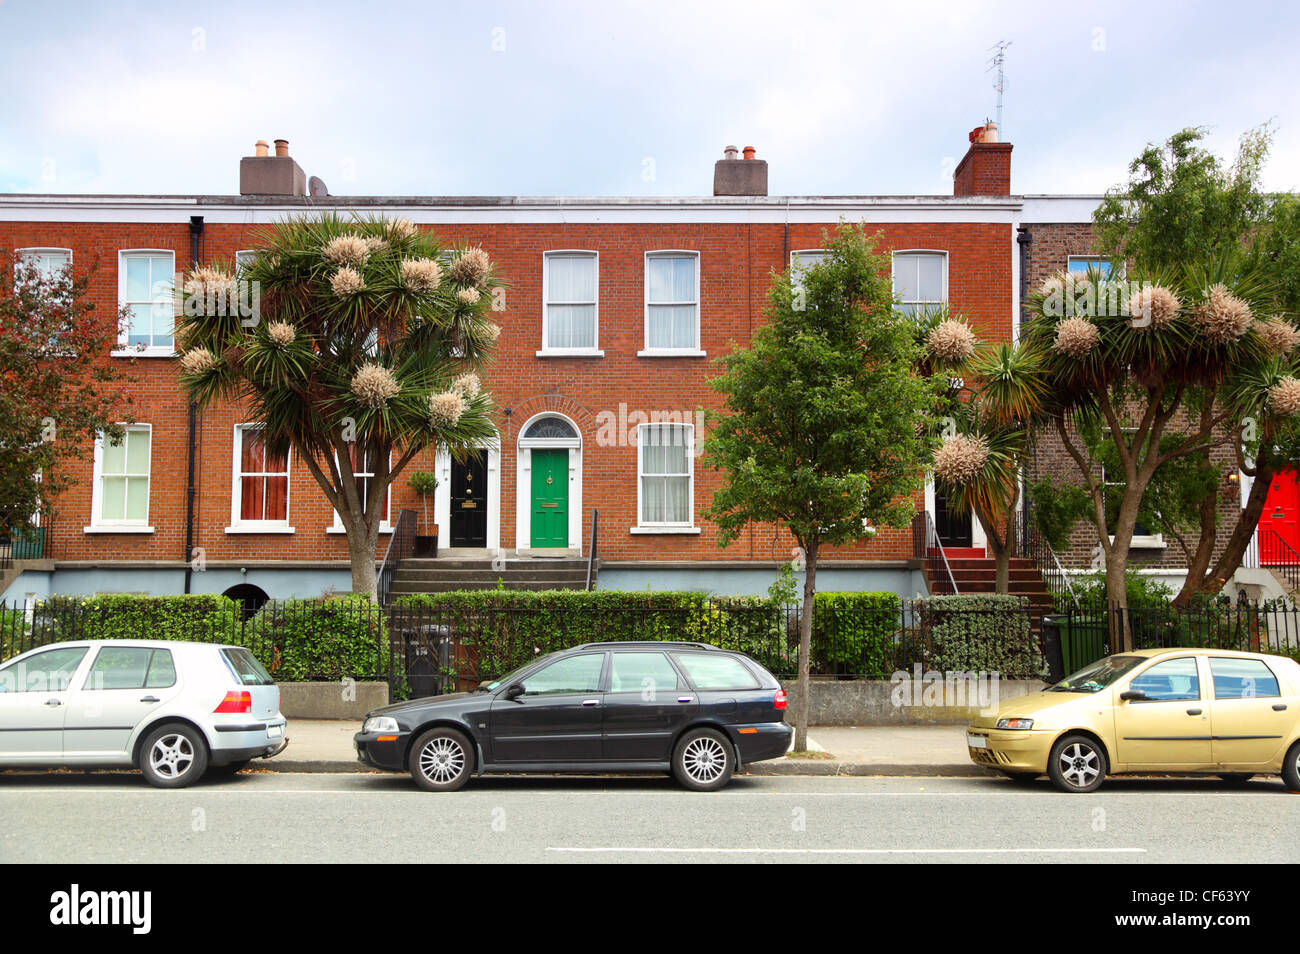 cars parked near two-story red brick house on street in Dublin, Ireland Stock Photo